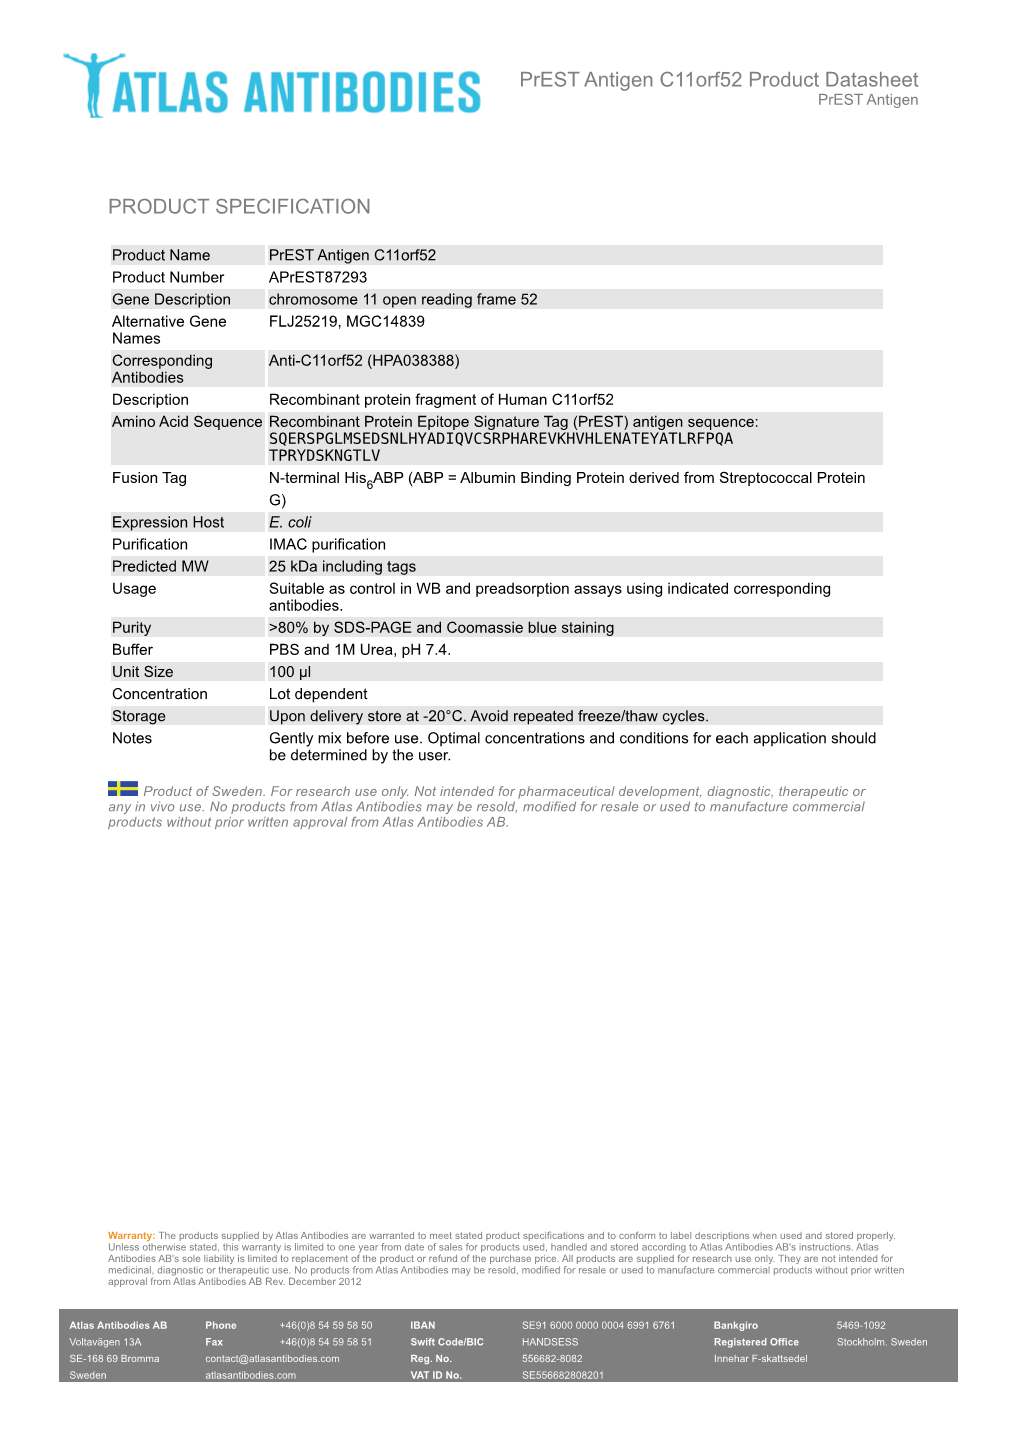 PRODUCT SPECIFICATION Prest Antigen C11orf52 Product Datasheet